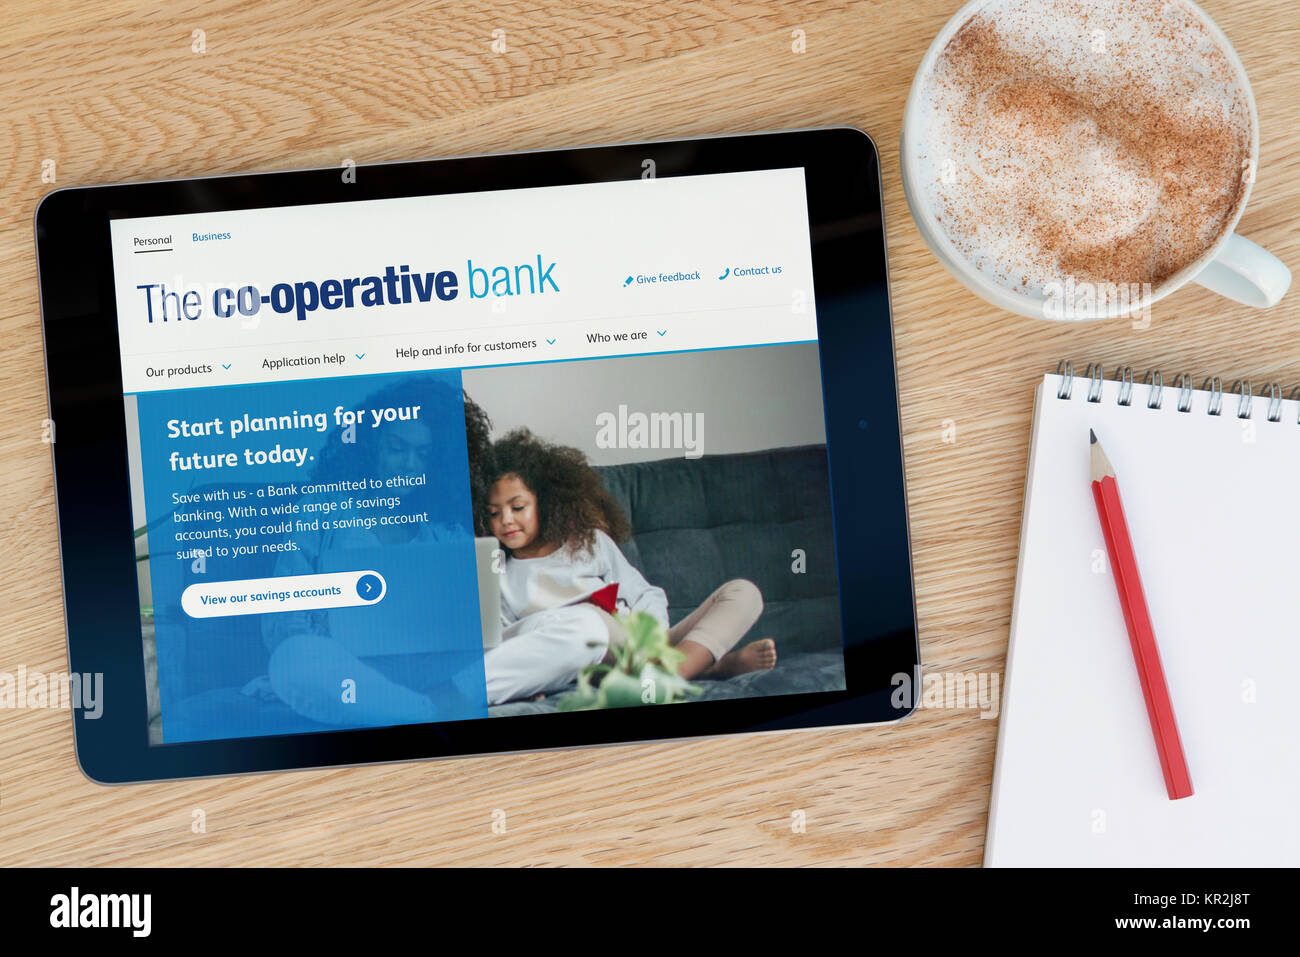 The Co-operative Bank website on an iPad tablet device which rests on a wooden table beside a notepad and pencil and a cup of coffee (Editorial only) Stock Photo